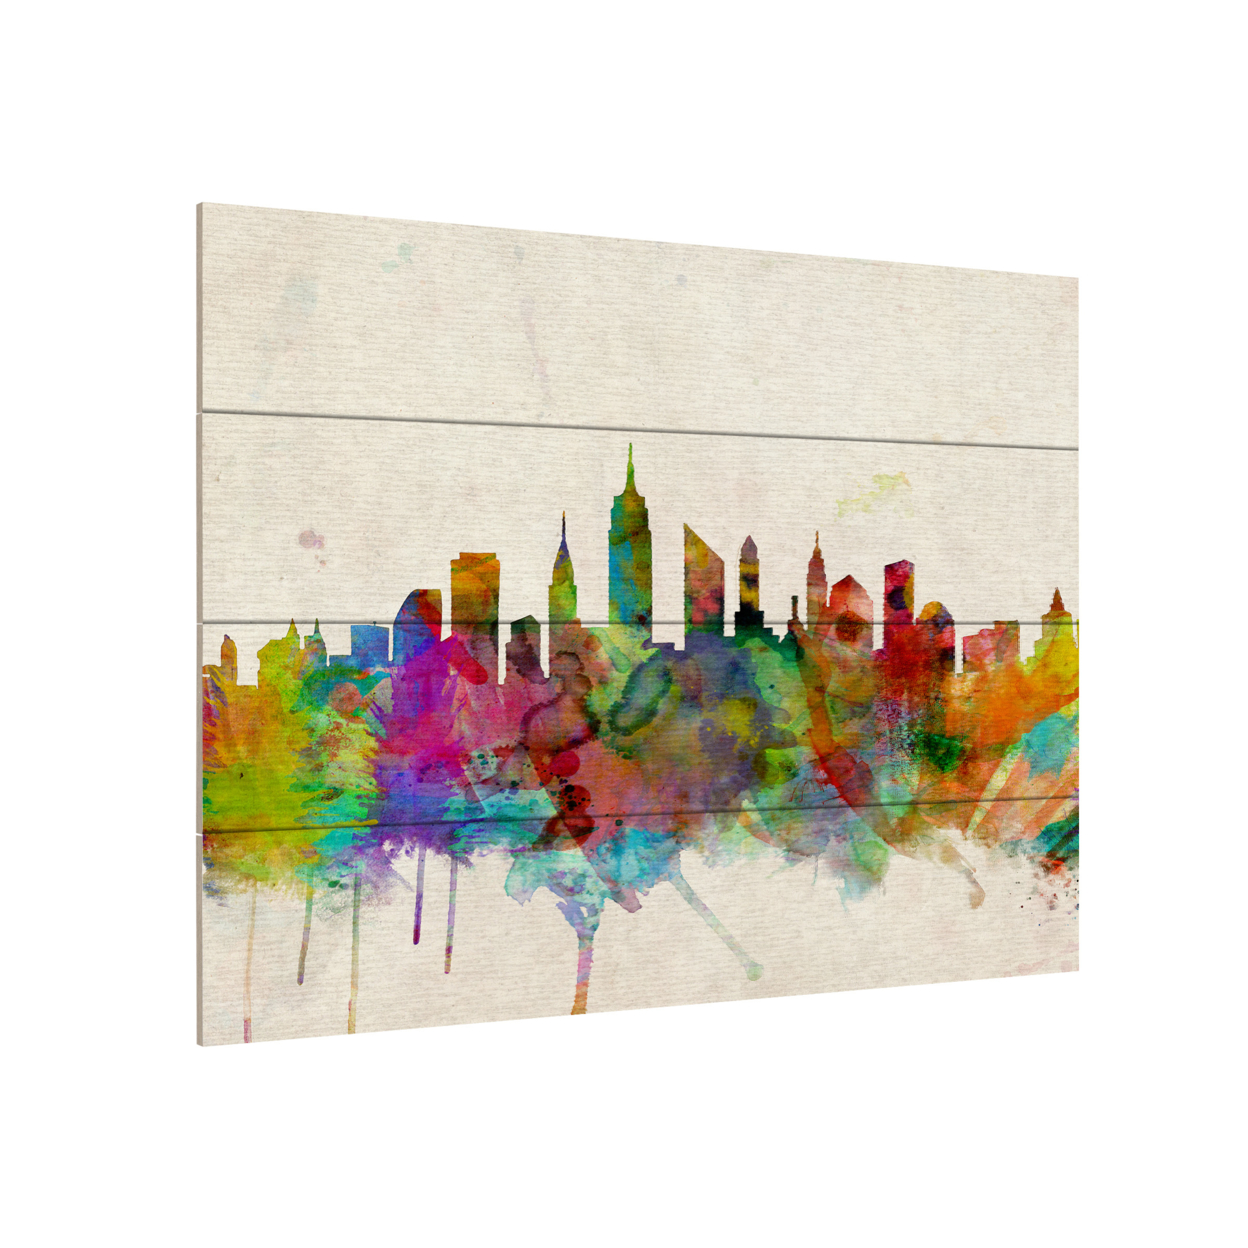 Wall Art 12 X 16 Inches Titled New York Skyline Tompsett Ready To Hang Printed On Wooden Planks